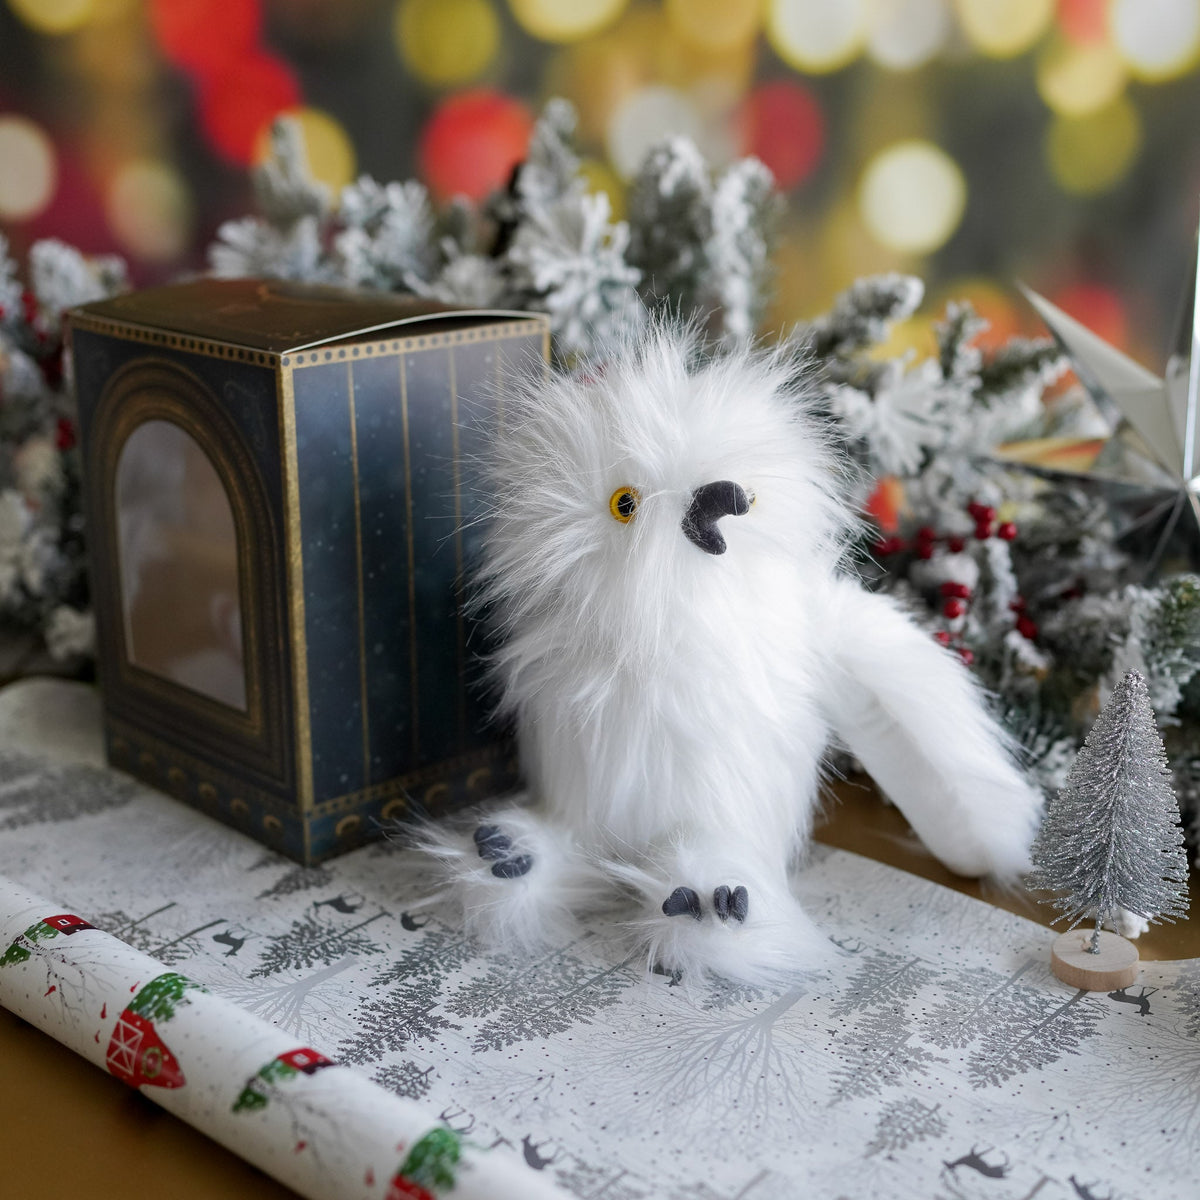 Adopt a Magical White Owl Plush with box cage and white owl stuffed animal surrounded by holiday wrapping paper and garland